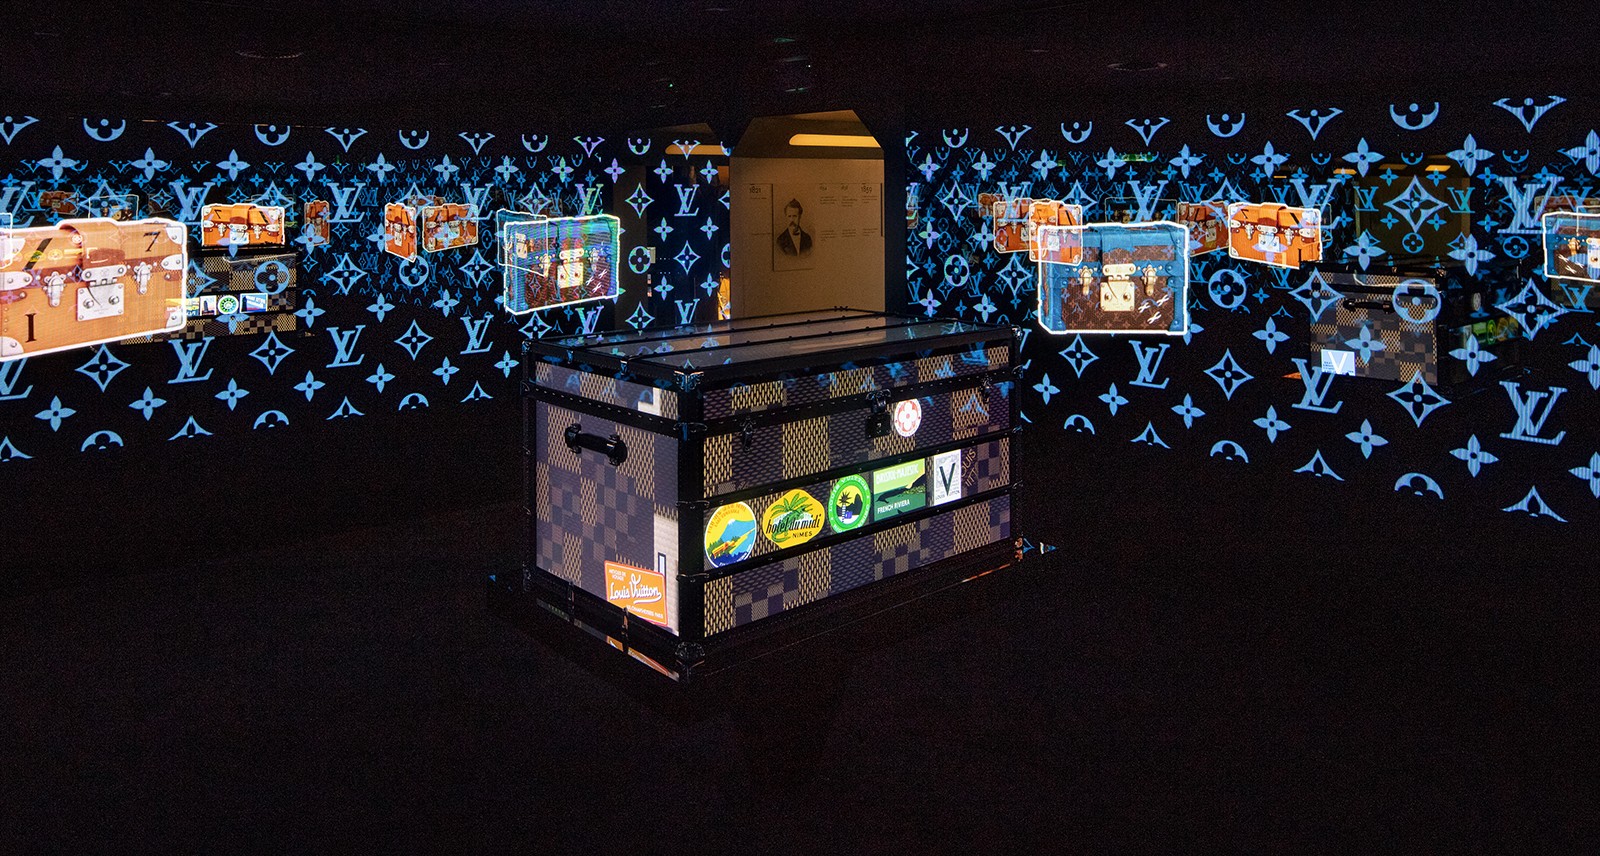 Louis Vuitton’s “Time Capsule” Exhibition Has Opened in Toronto, and It’s Well Worth a Look ...